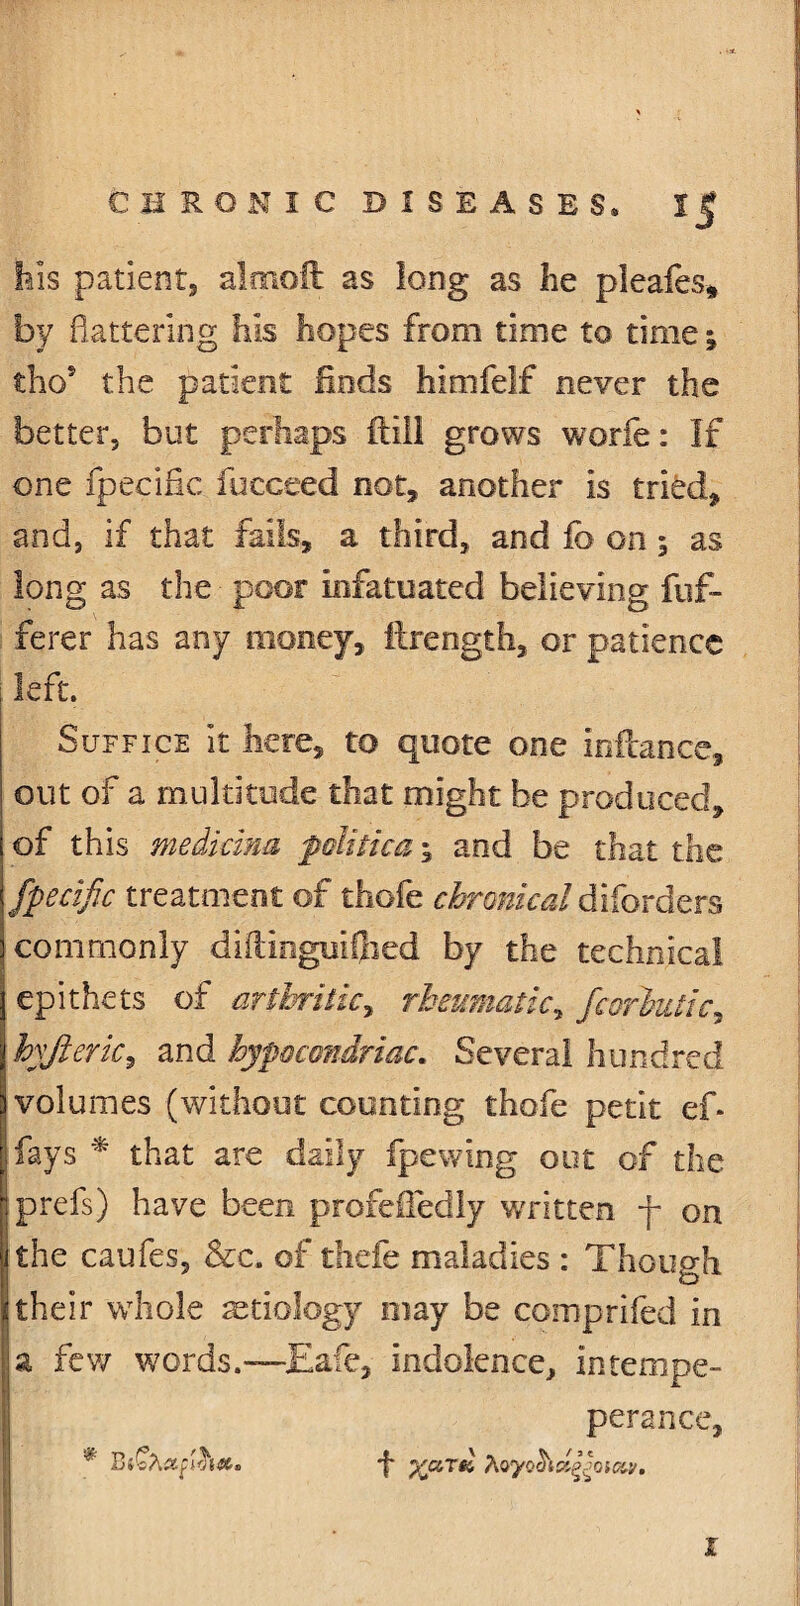 his patient, almoft as long as lie pleafes* by flattering his hopes from time to time; tho5 the patient finds himfelf never the better, but perhaps ftill grows worie: If one fpecific fucceed not, another is tried, and, if that fails, a third, and fo on ; as long as the poor infatuated believing fuf- ferer has any money, ilrength, or patience left. Suffice it here, to quote one inftance, out of a multitude that might be produced, of this medicina folitka; and be that the fpecific treatment of thofe chronical d borders commonly diPdngmfiied by the technical epithets of arthritic, rheumatic, fcorhutic, hyjieric, and hypocondriac. Several hundred volumes (without counting thofe petit ef* fays * that are daily fpewing out of the prefs) have been profeffedly written f on the caufes, &c. of thefe maladies : Though their whole aetiology may be compriied in a few words.—Eafe, indolence, intempe- perance, * *f* %cltsI Myooidyoiav. \ I